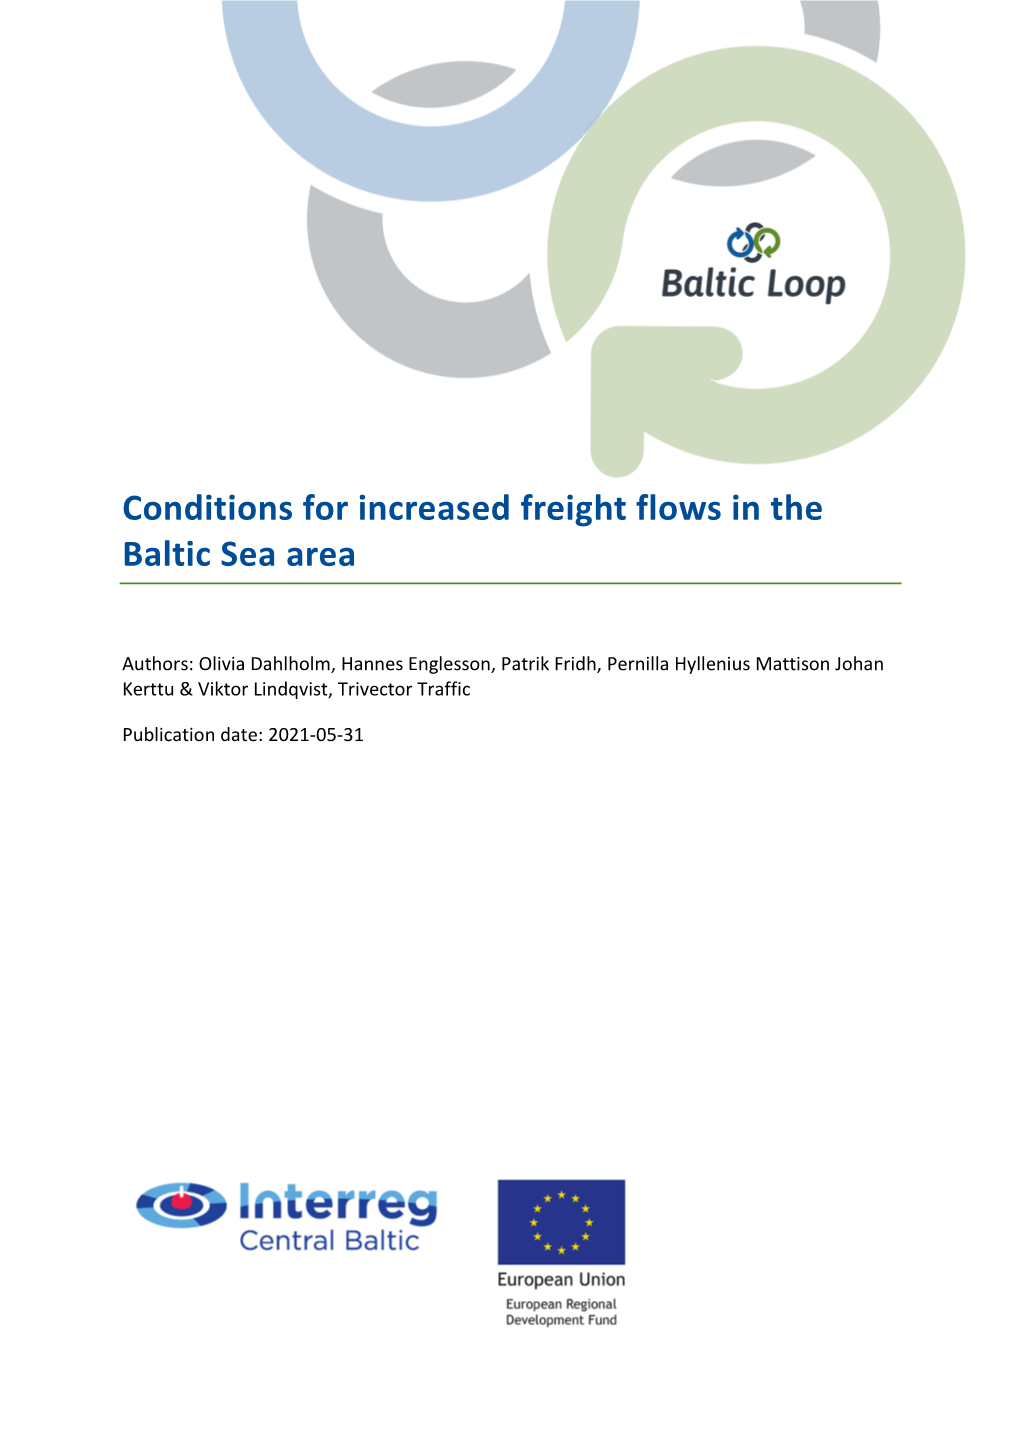 Conditions for Increased Freight Flows in the Baltic Sea Area